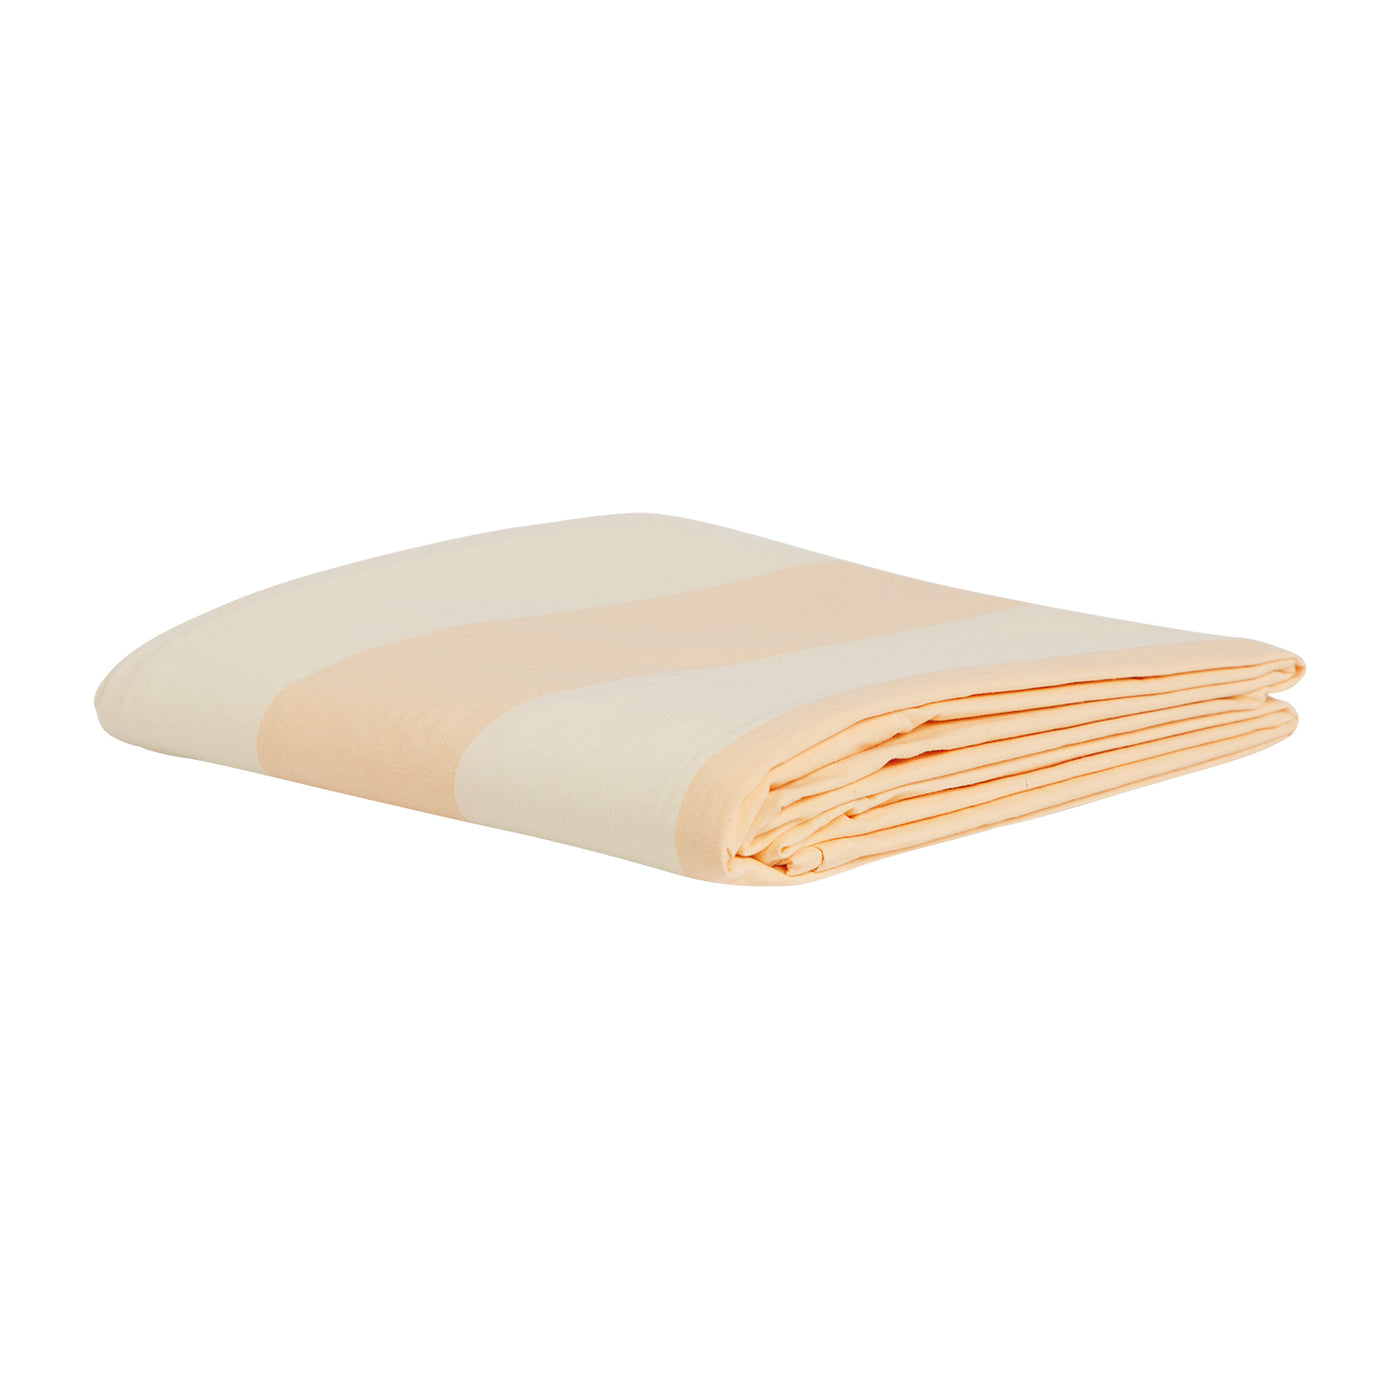 Uxbridge Cotton Fitted Sheet - Crepe Cot